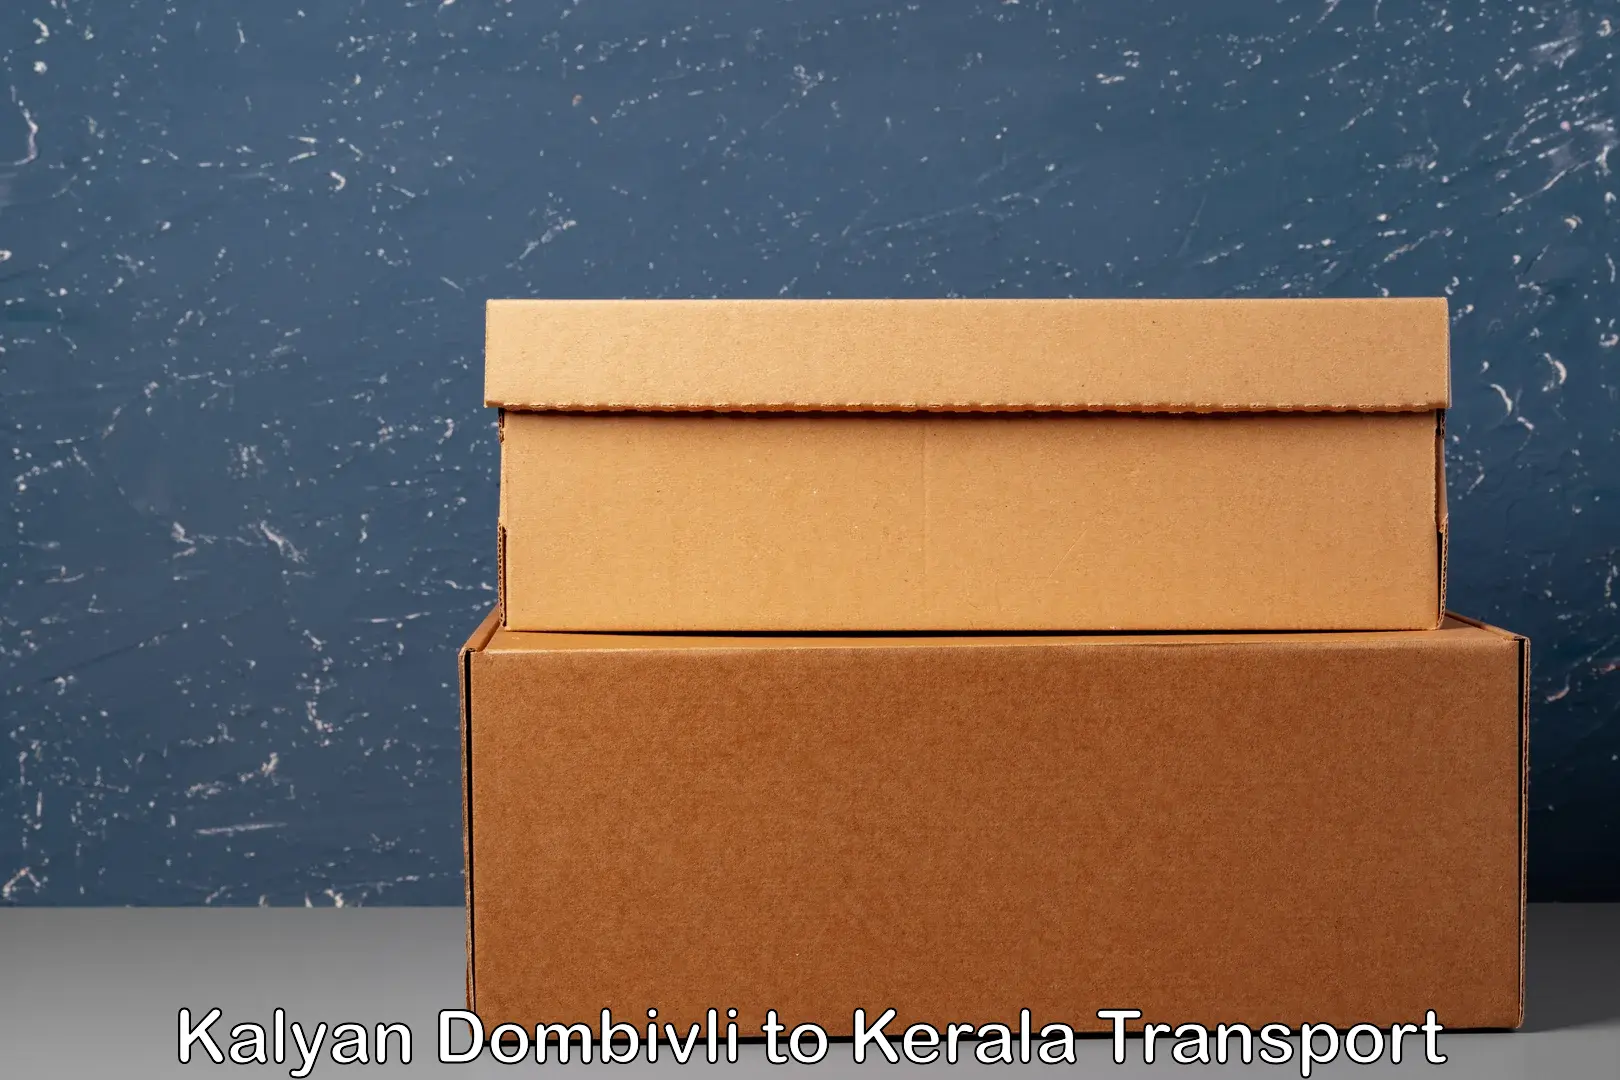 Transport bike from one state to another Kalyan Dombivli to Angamaly